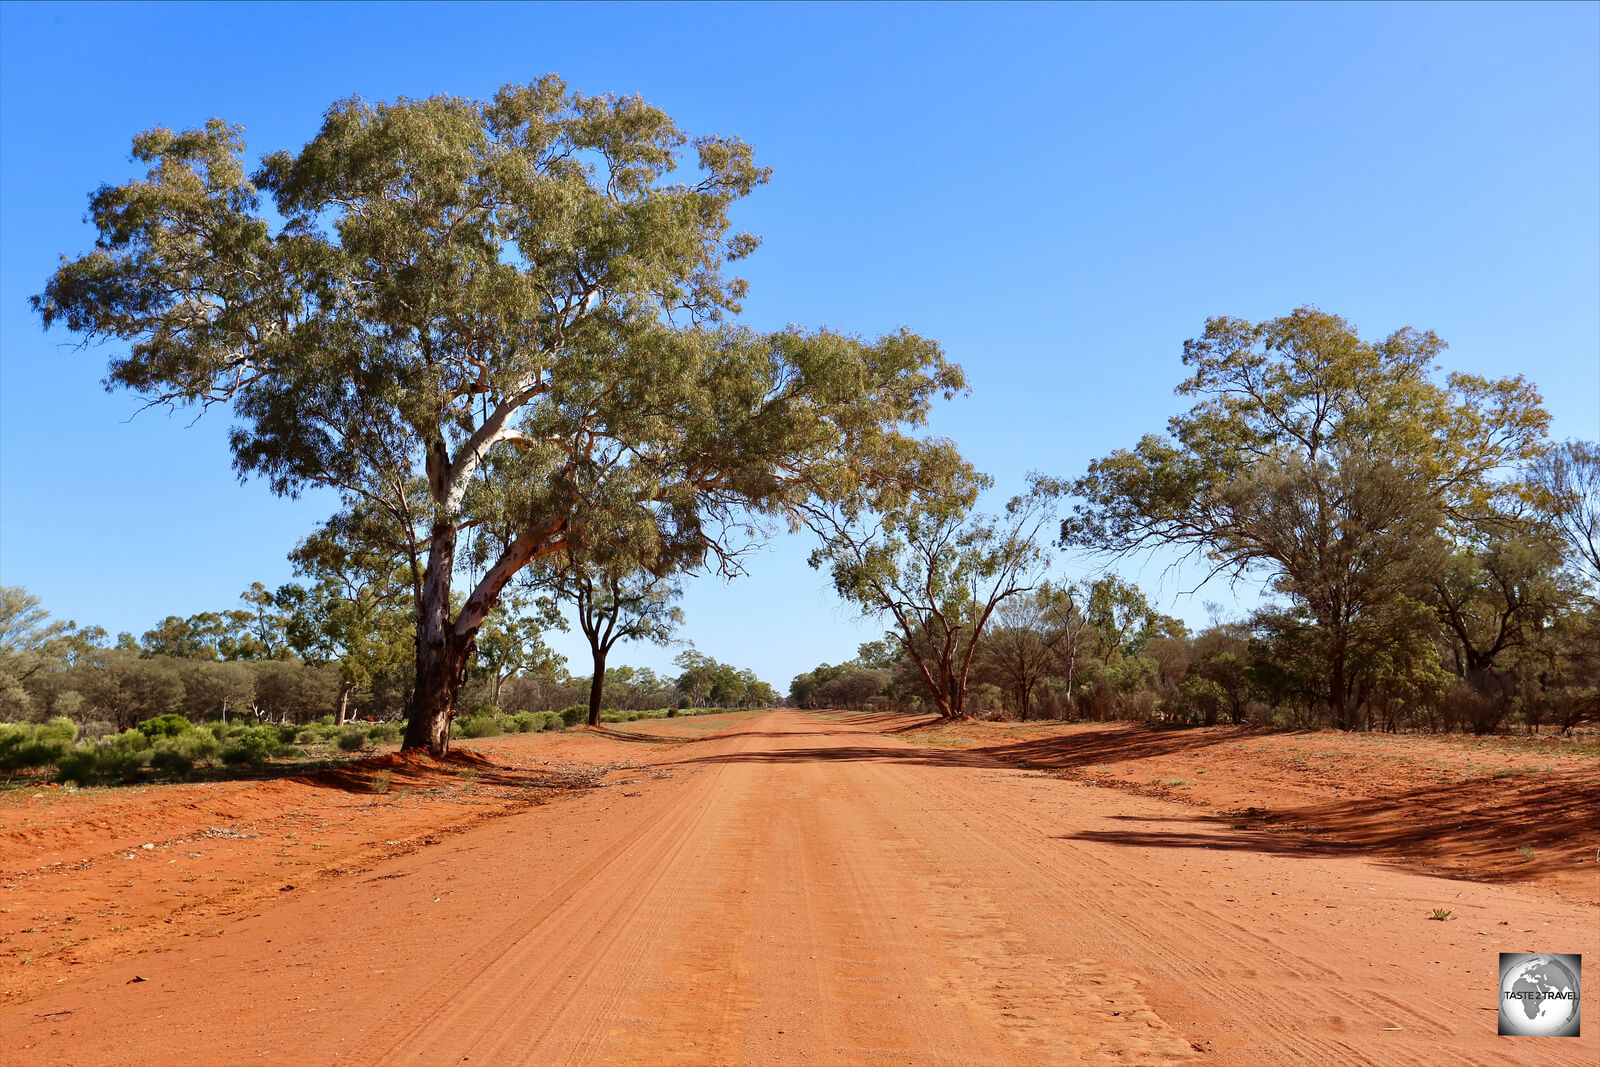 Outback Road near Bourke, New South Wales.